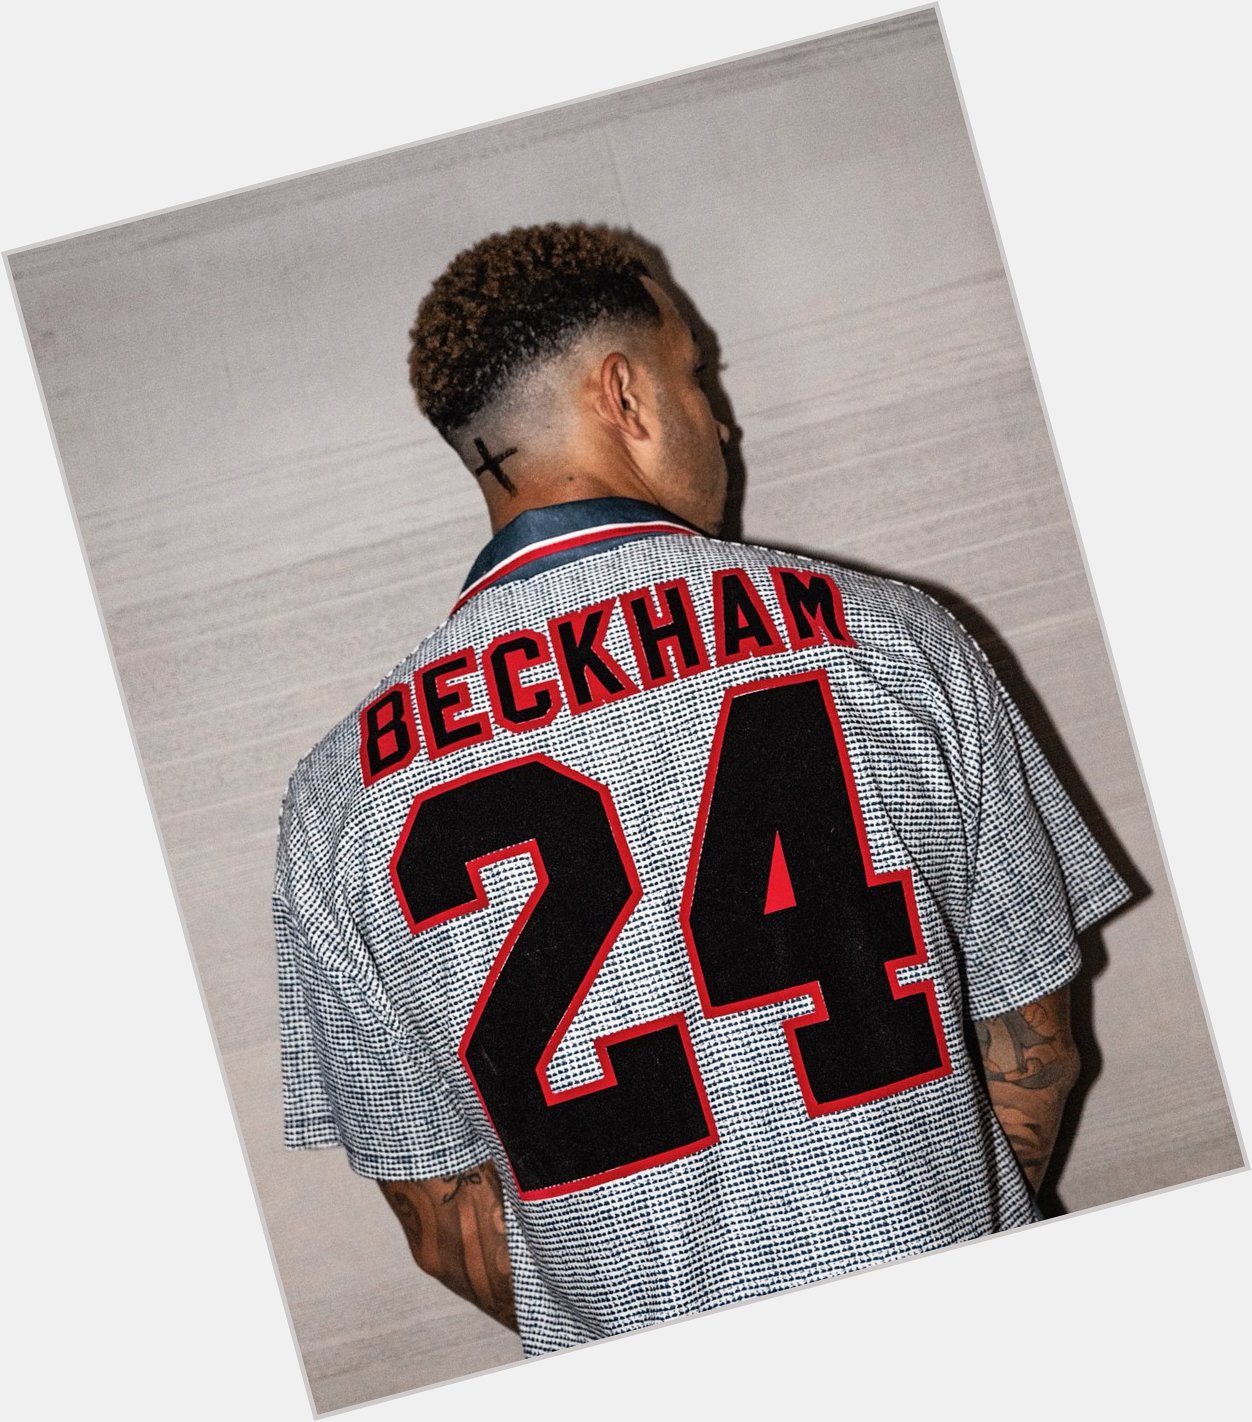 We ve got to pay homage to the greats. Happy birthday to legend David Beckham!     